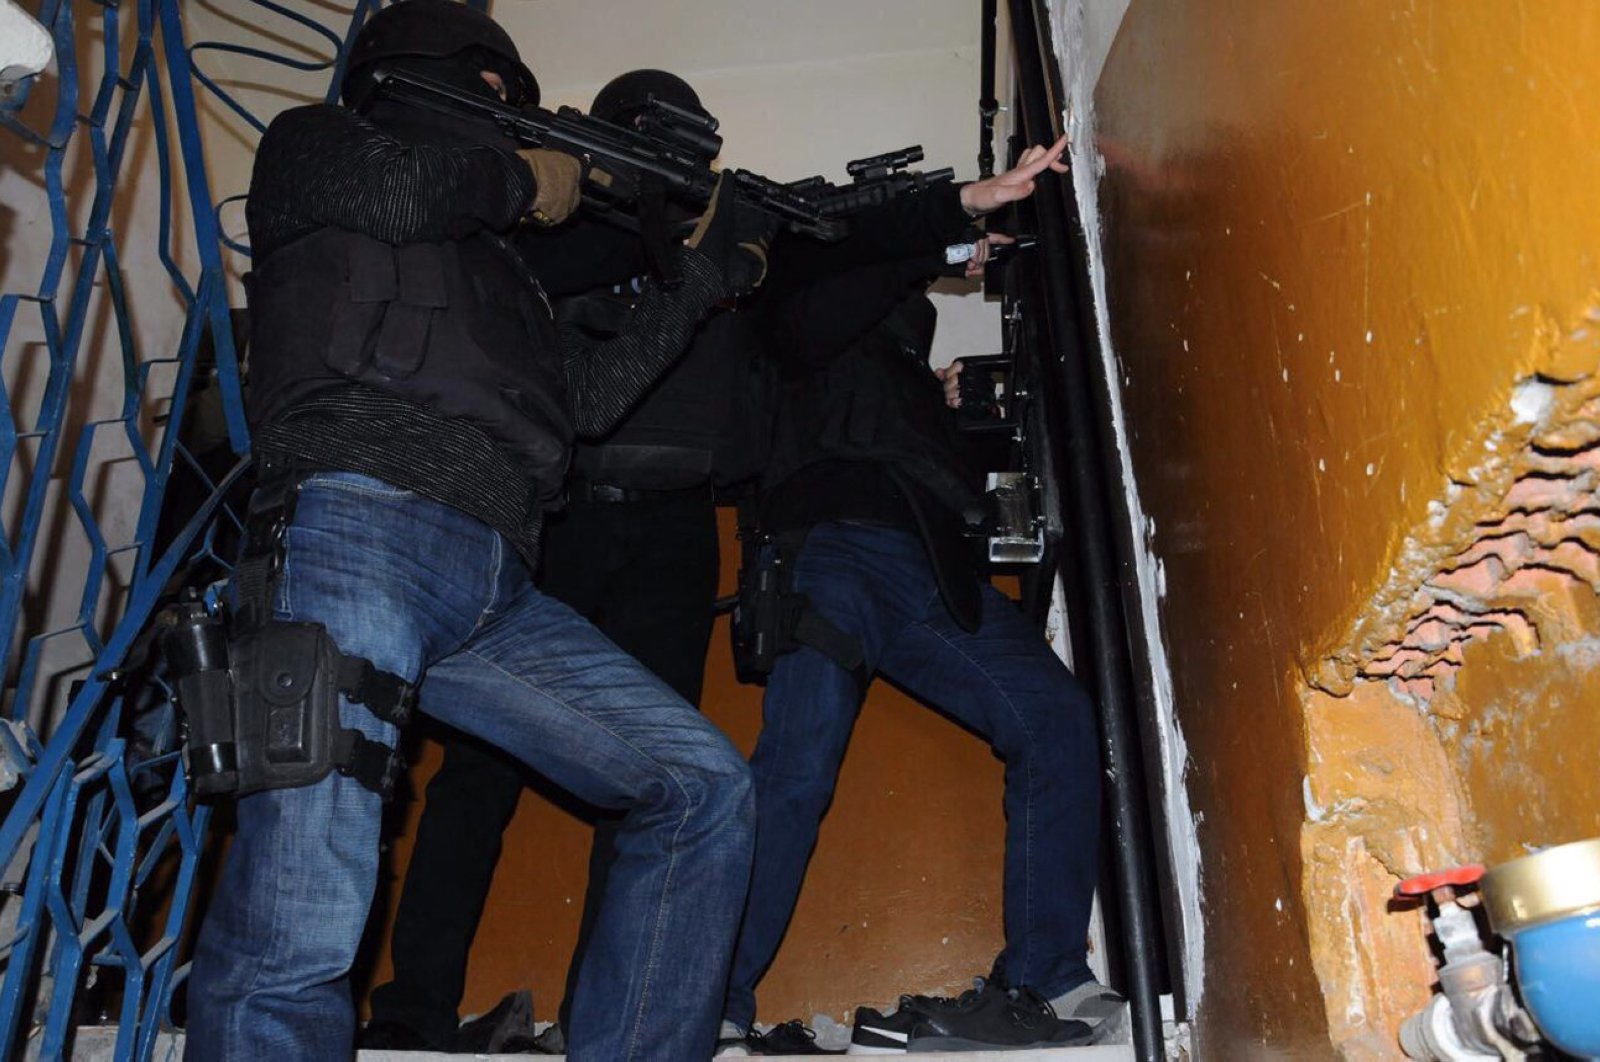 Turkish security forces raid an apartment in Istanbul during a counter-terror operation (Sabah File Photo)